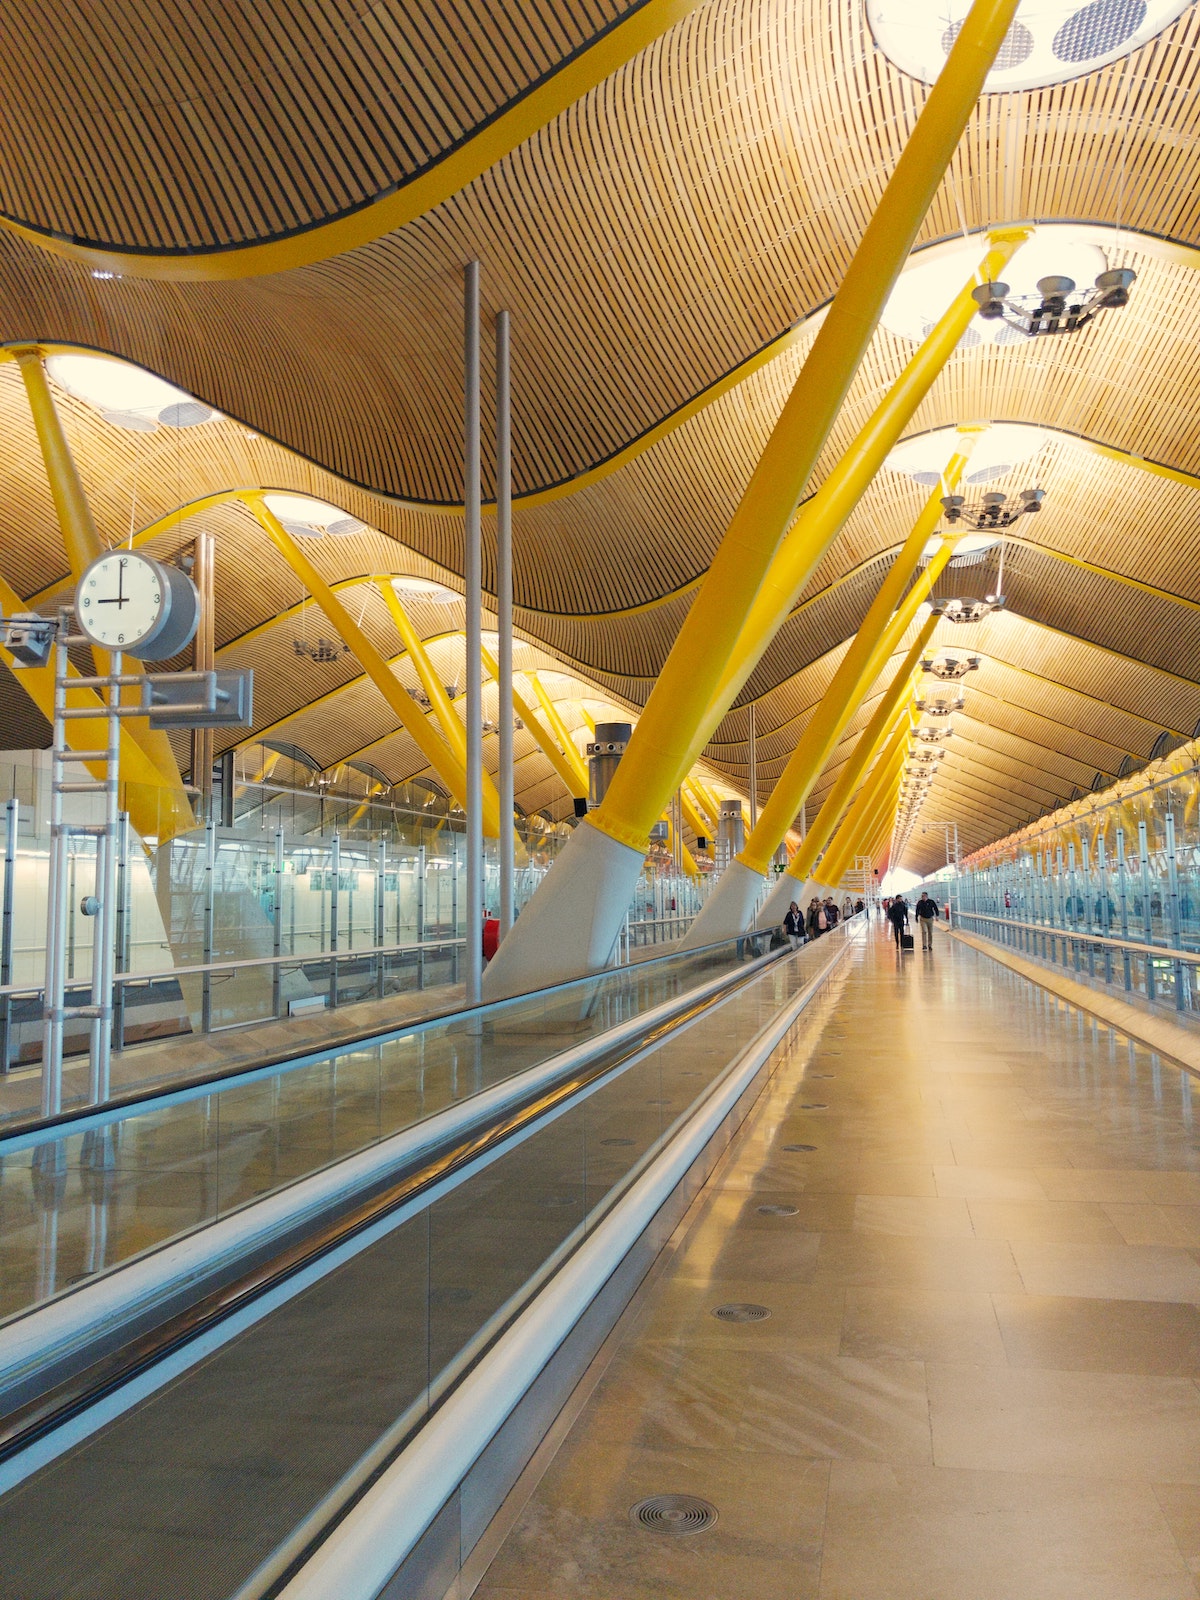 Interior of an airport with a moving walkway and modern ondulated ceiling held up by yellow beams.